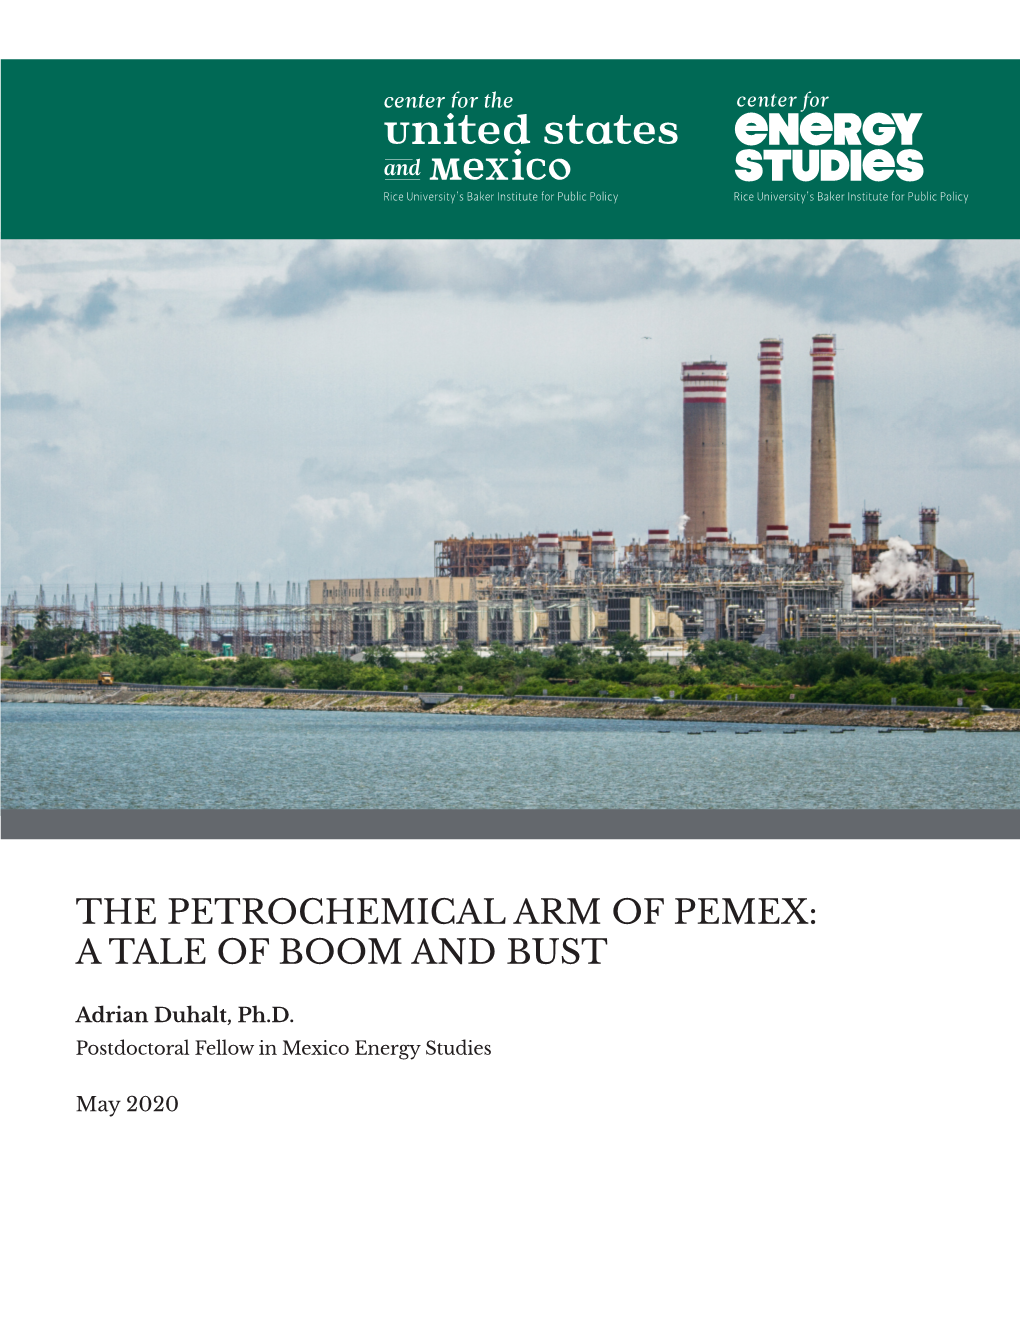 The Petrochemical Arm of Pemex: a Tale of Boom and Bust